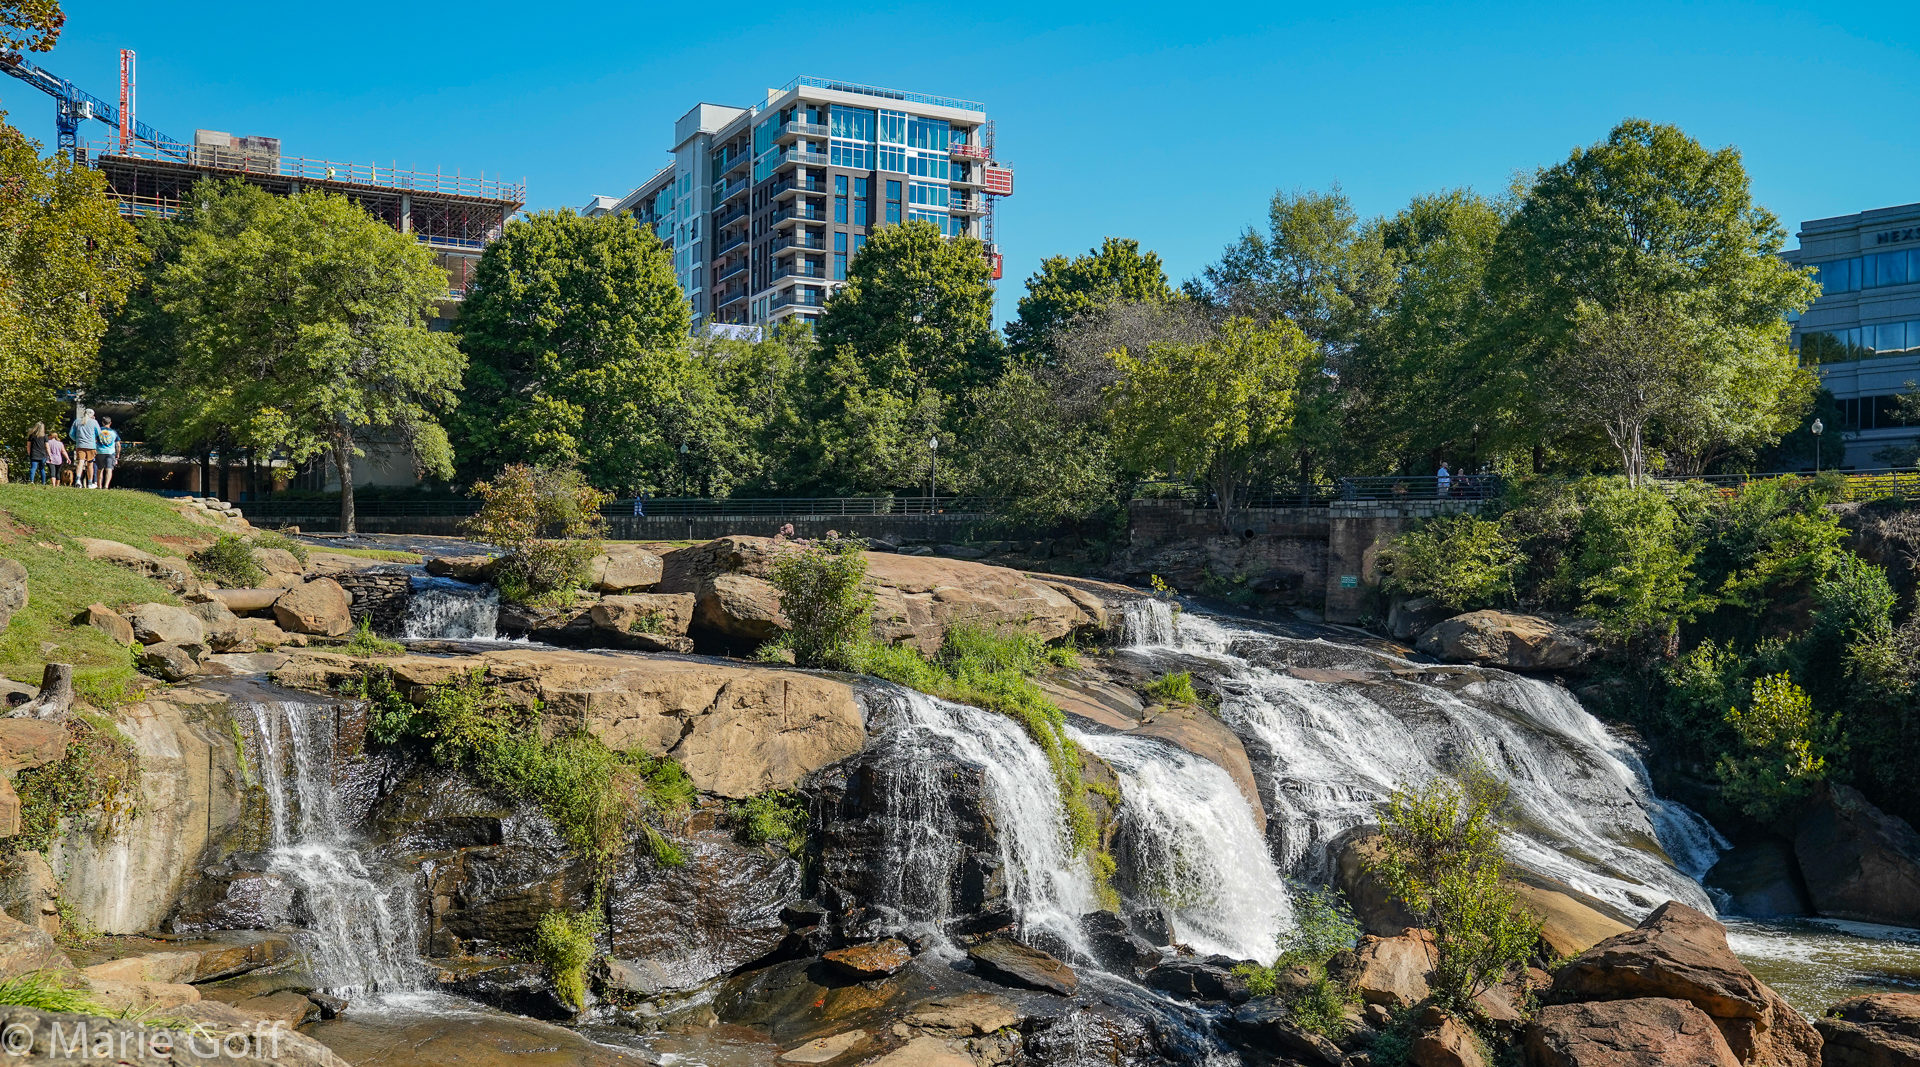 Images of Greenville, S.C. and a Surprise at Caesar’s Head State Park